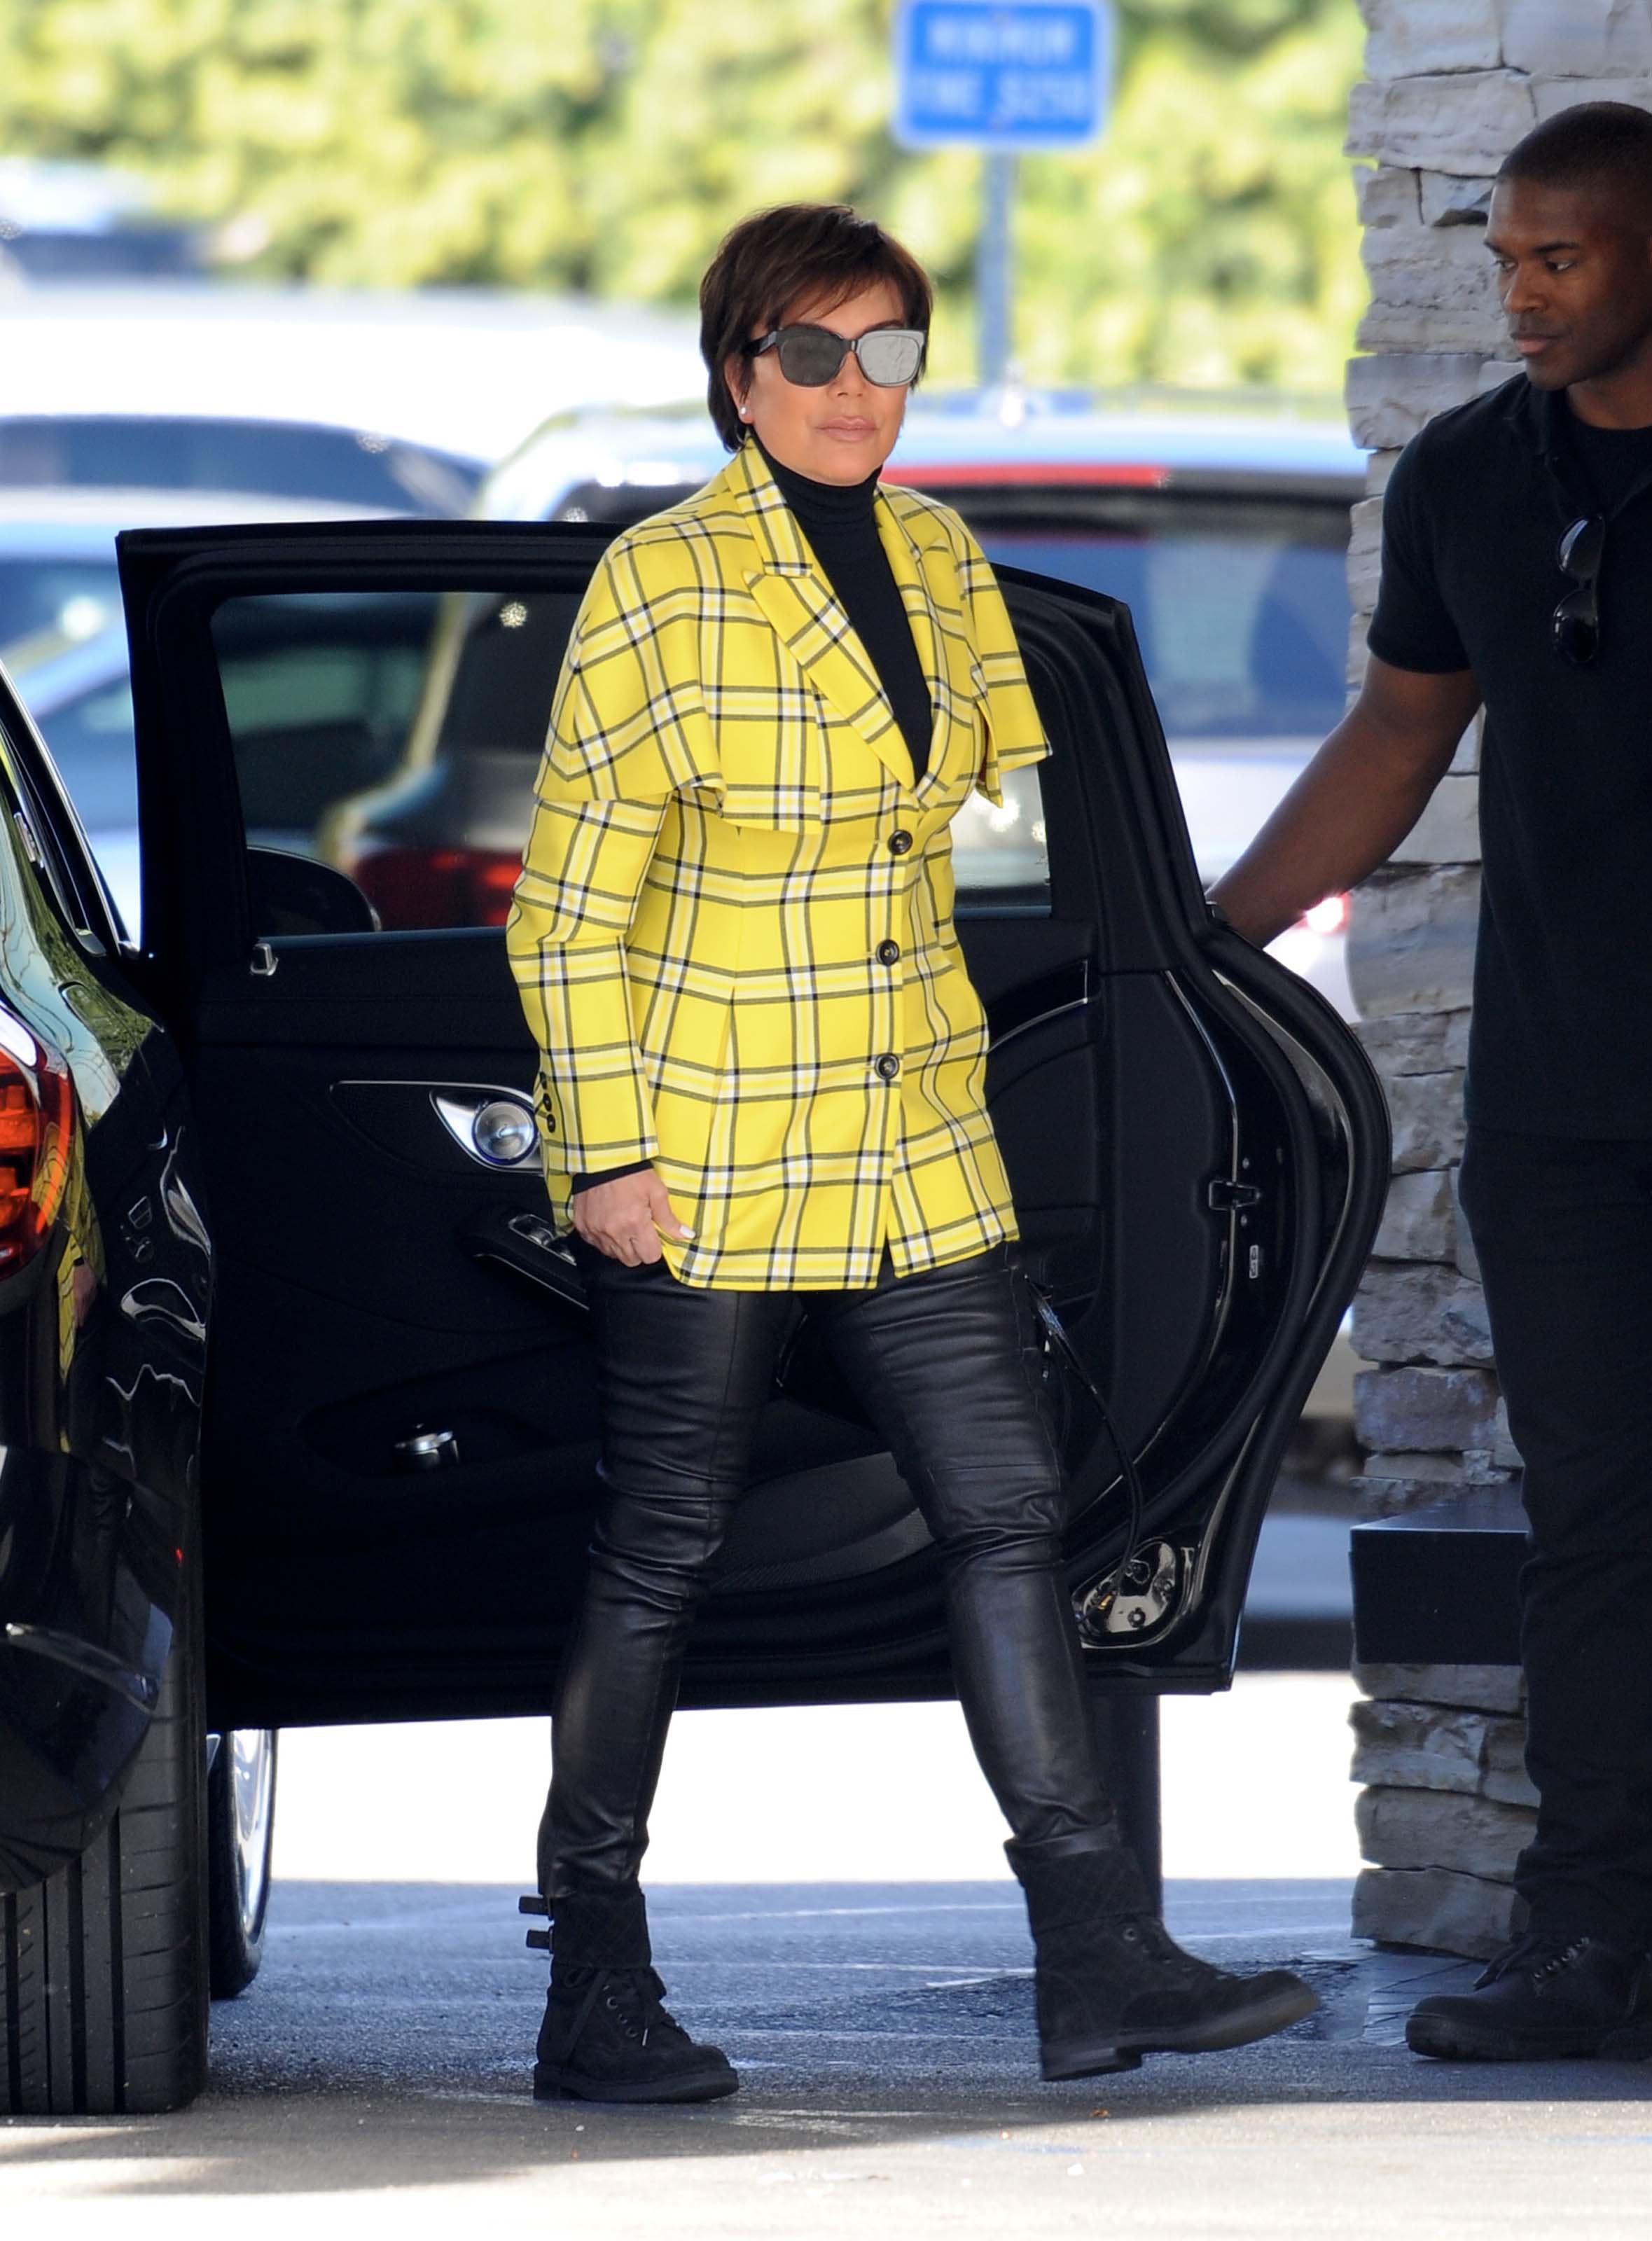 Kris Jenner arriving for the Keeping Up With The Kardashians